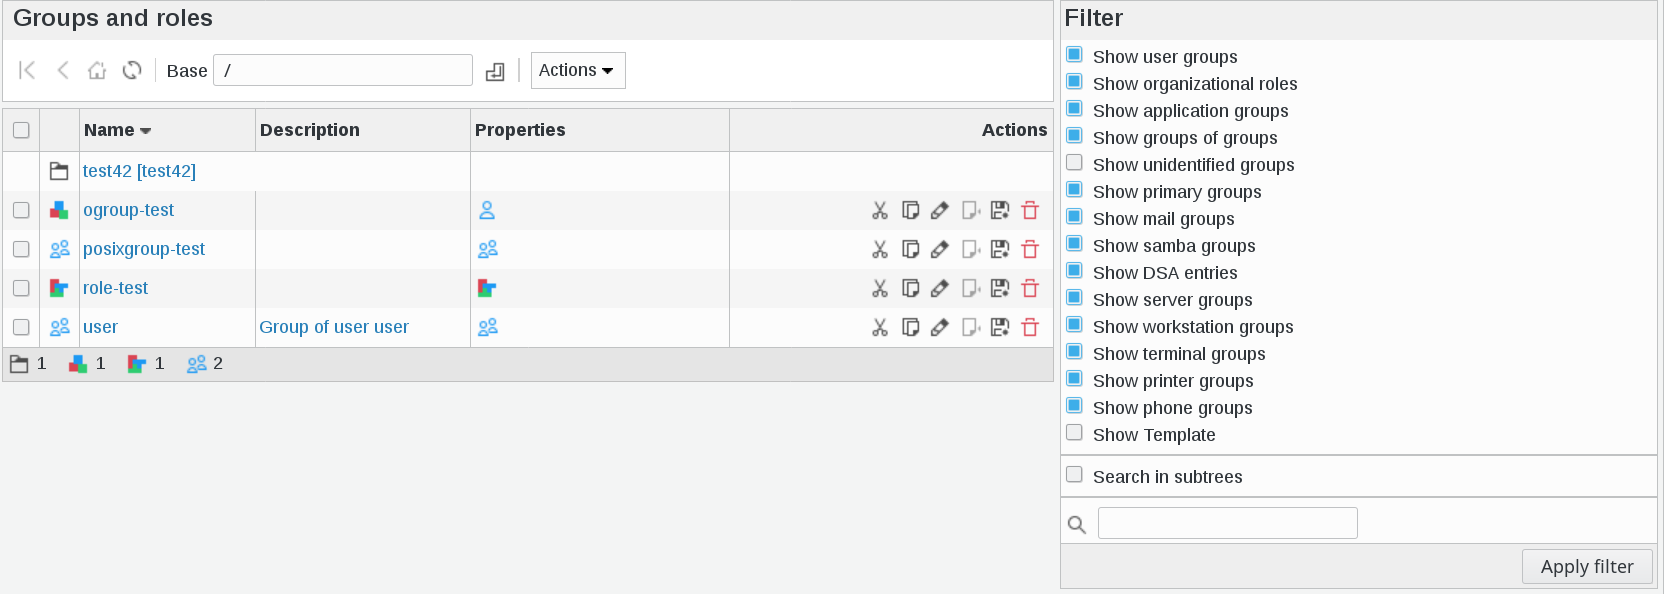 Picture of Groups and roles section details in FusionDirectory